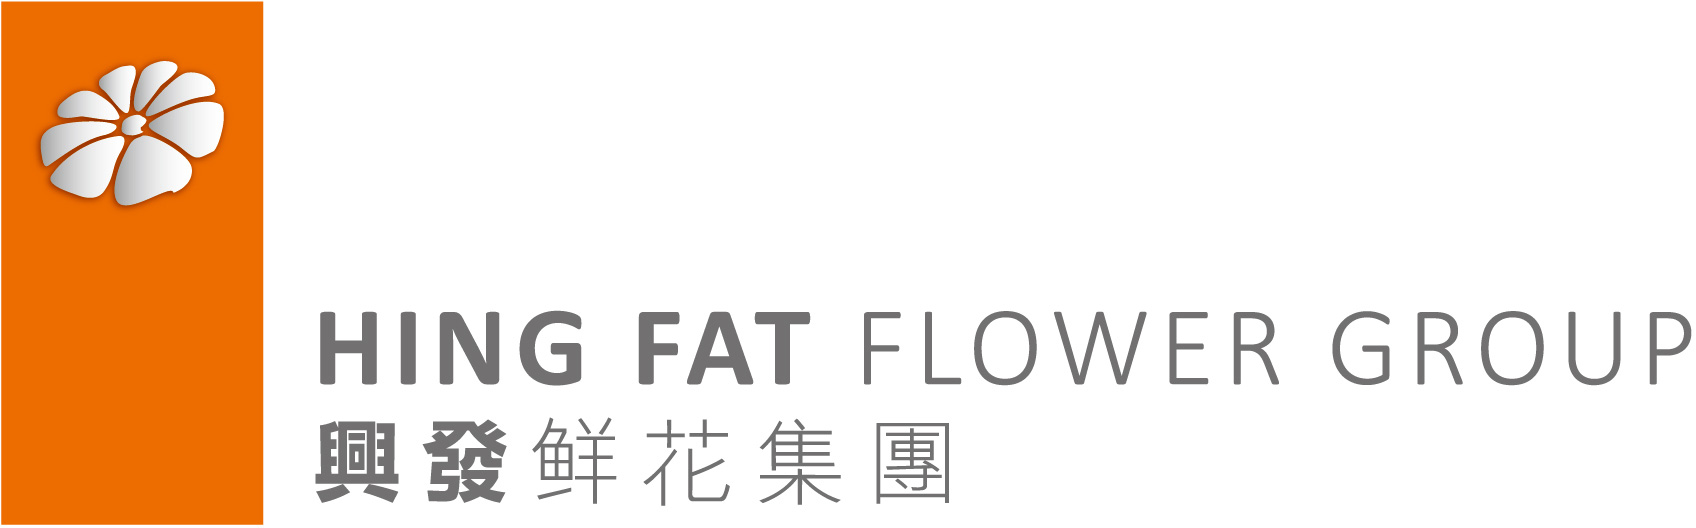 Our Business & Services – Hing Fat Flower Group